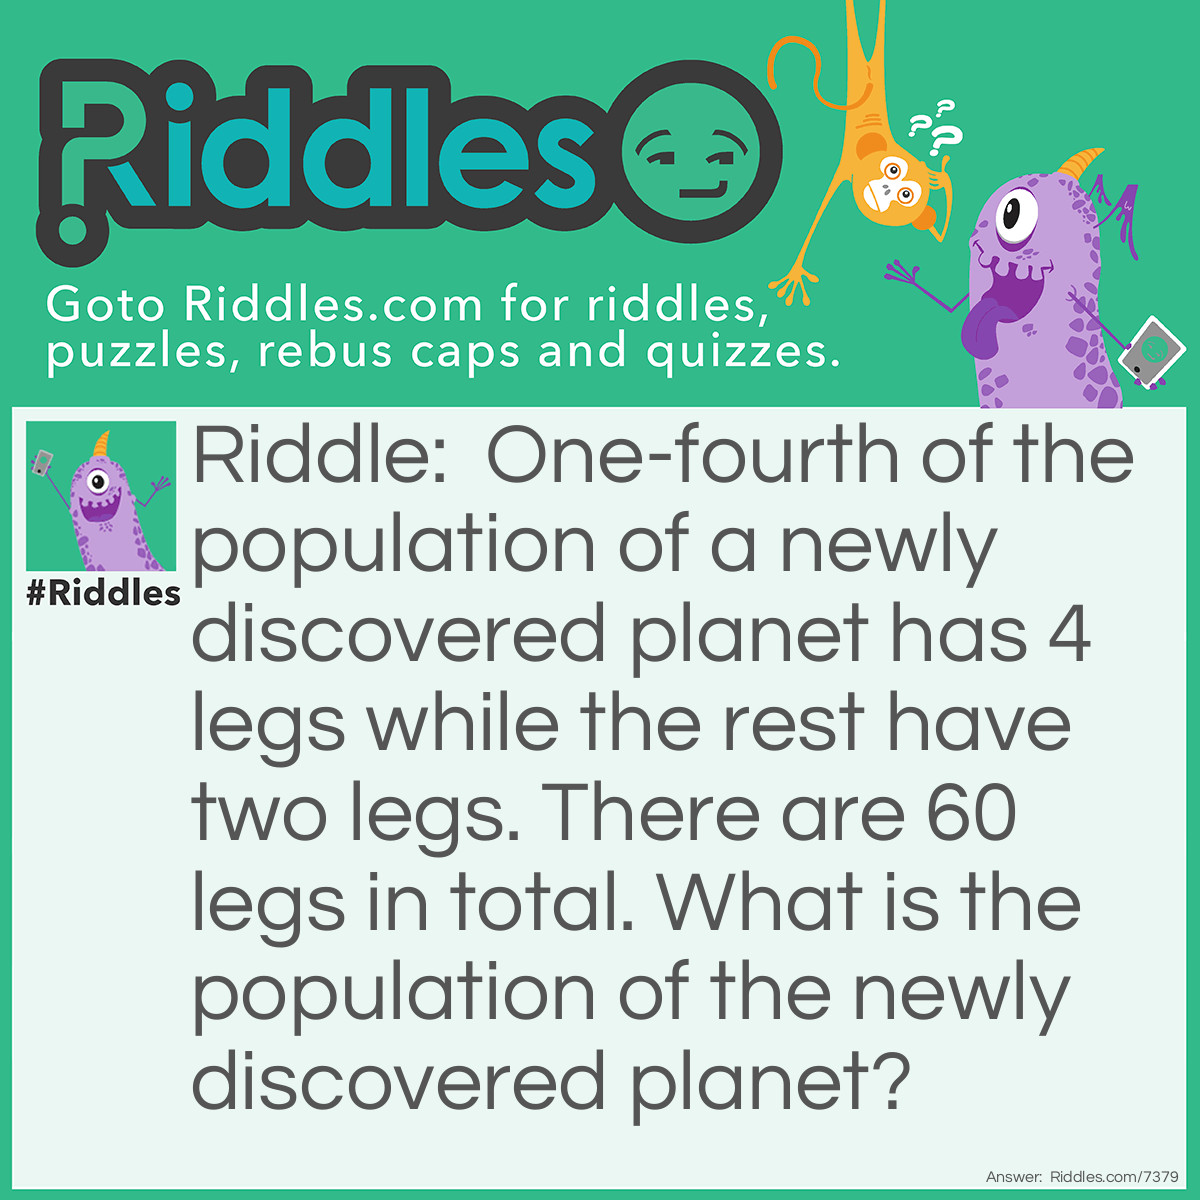 Riddle: One-fourth of the population of a newly discovered planet has 4 legs while the rest have two legs. There are 60 legs in total. What is the population of the newly discovered planet? Answer: 4 + 2 + 2 + 2 = 10 legs and 4 inhabitants. Repeat this six times to use up all 60 legs and you end up with 24 total inhabitants.